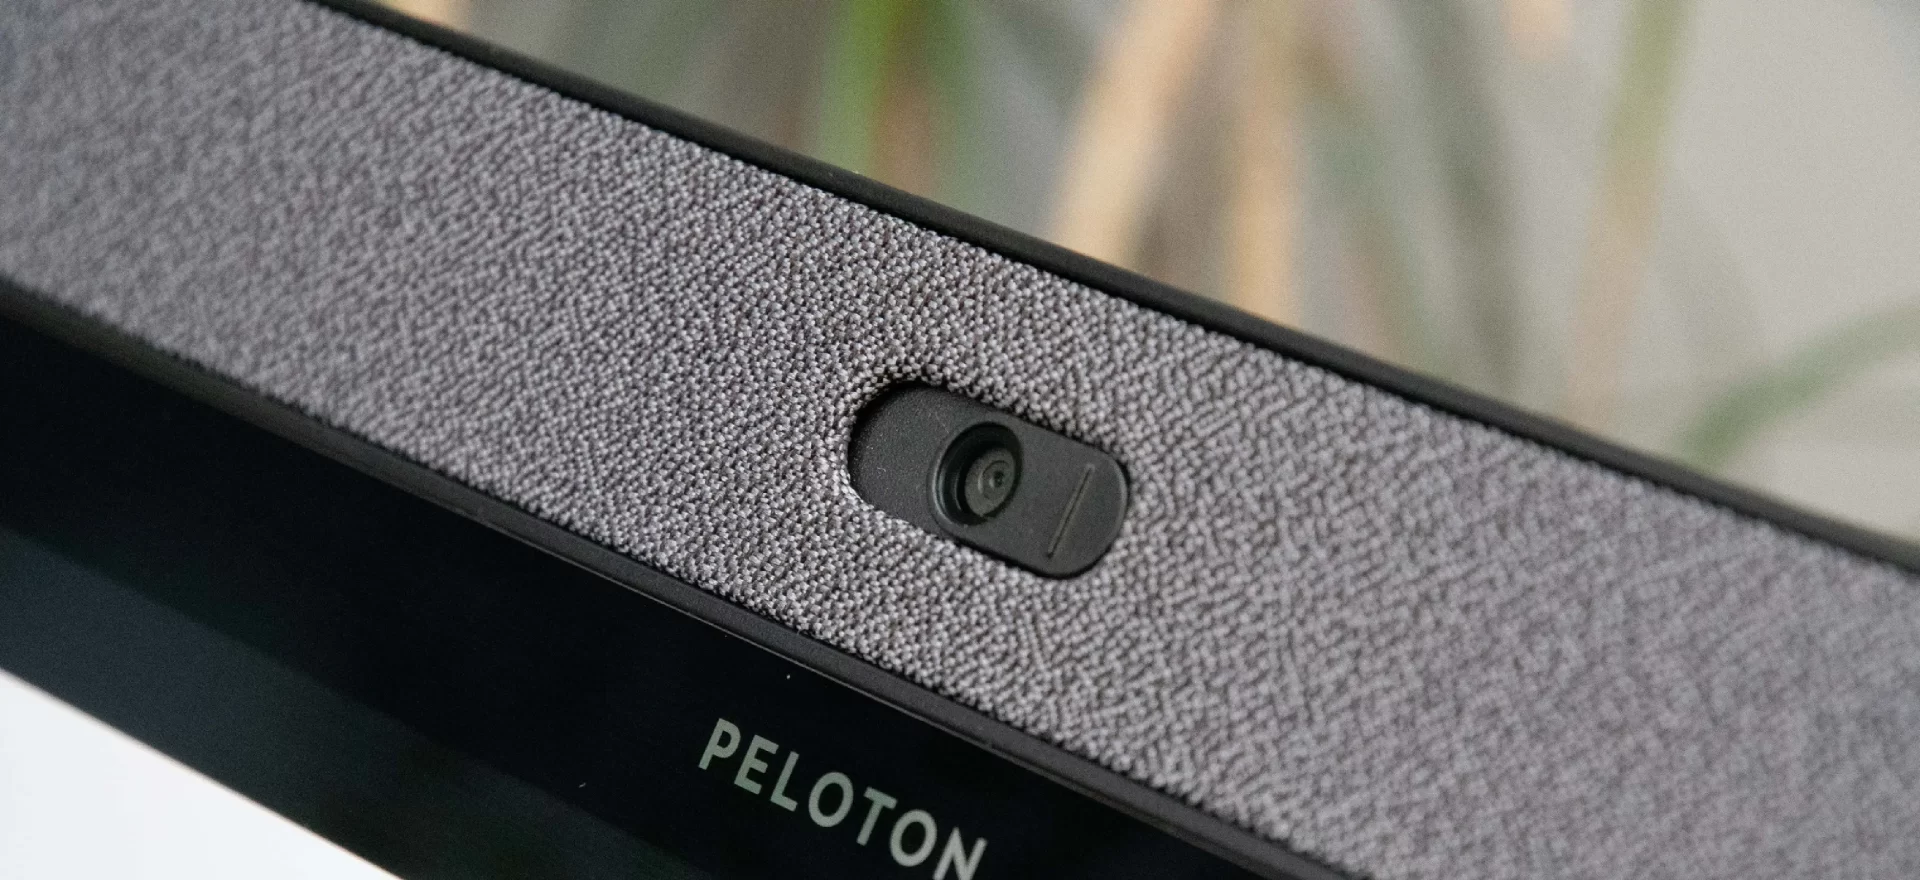 Why Does Peloton Have a Camera